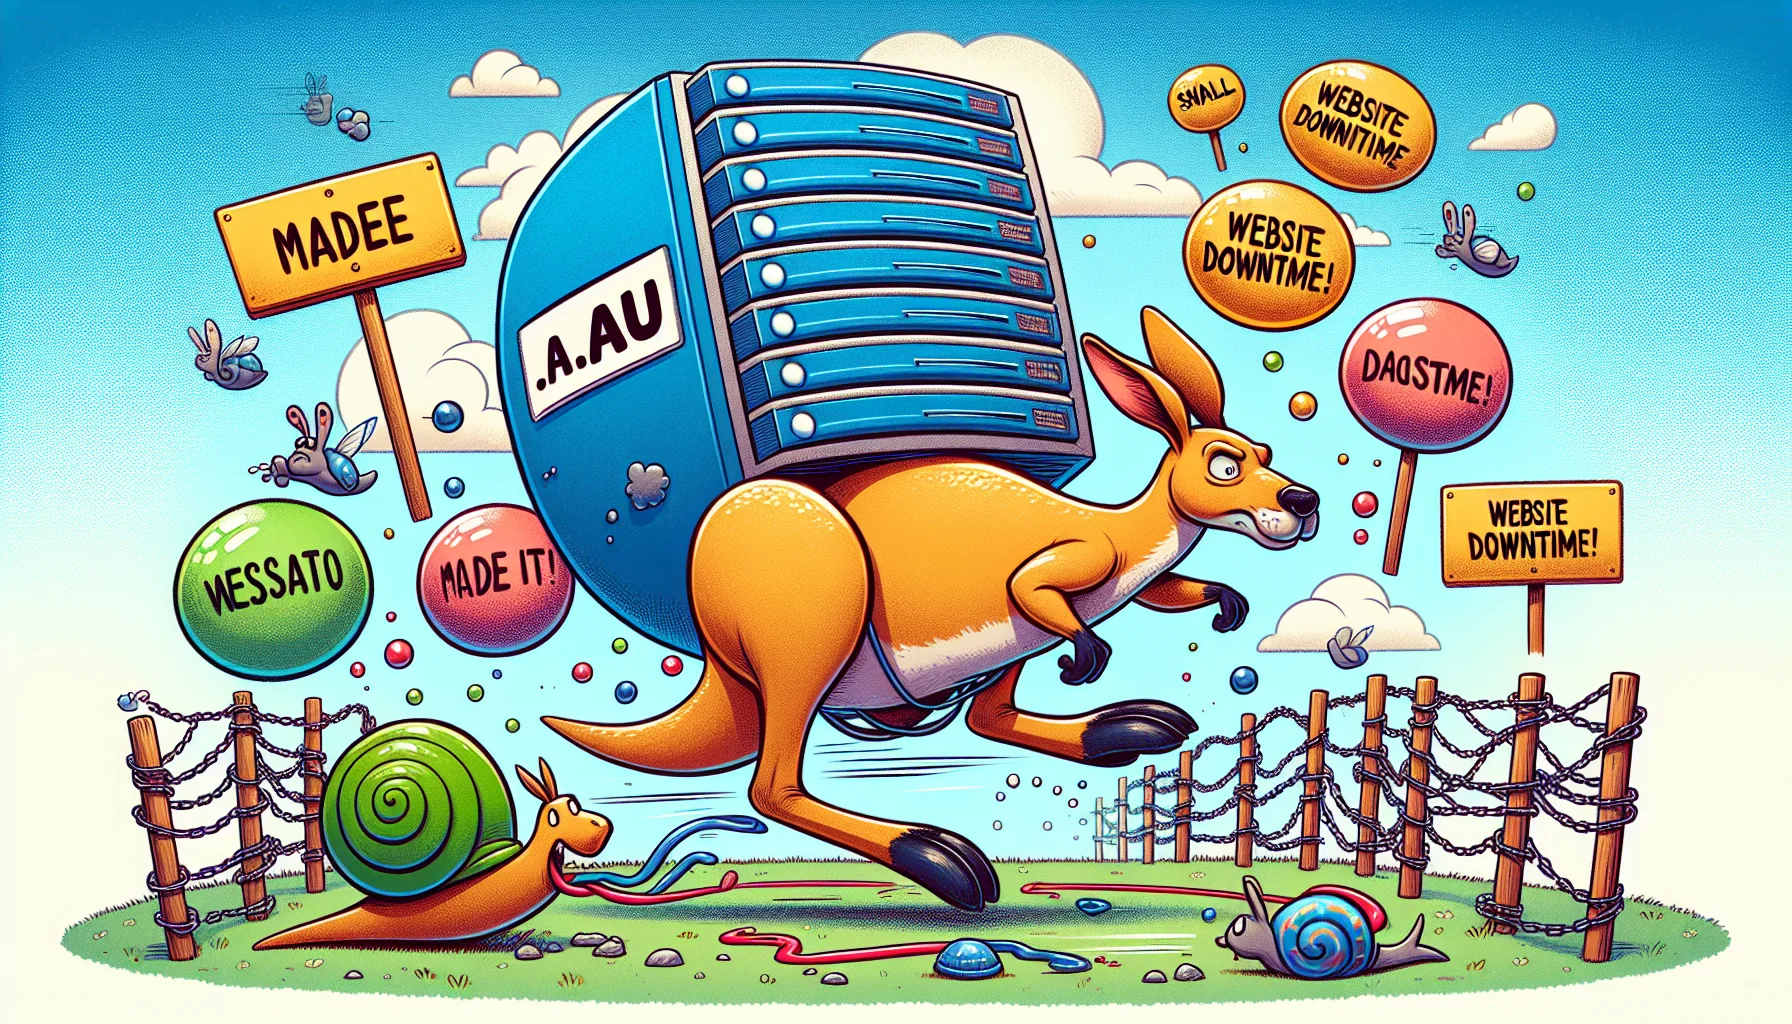 Picture of an amusing scenario revolving around website hosting: A comical kangaroo, as the symbol of Australia (.au domain), is bouncing around with a large imaginary web server on its back. The kangaroo is leaping over common obstacles encountered during web hosting, like a snail symbolizing slow speeds and a barrier labeled 'website downtime'. Around the kangaroo, vividly colored bubbles float containing URLs ending with '.au', representing successful websites. Notably, one kangaroo's pouch contains a victorious 'Made it!' flag. This playful scene serves as a metaphorical representation of overcoming hosting challenges in a light-hearted, enticing way.